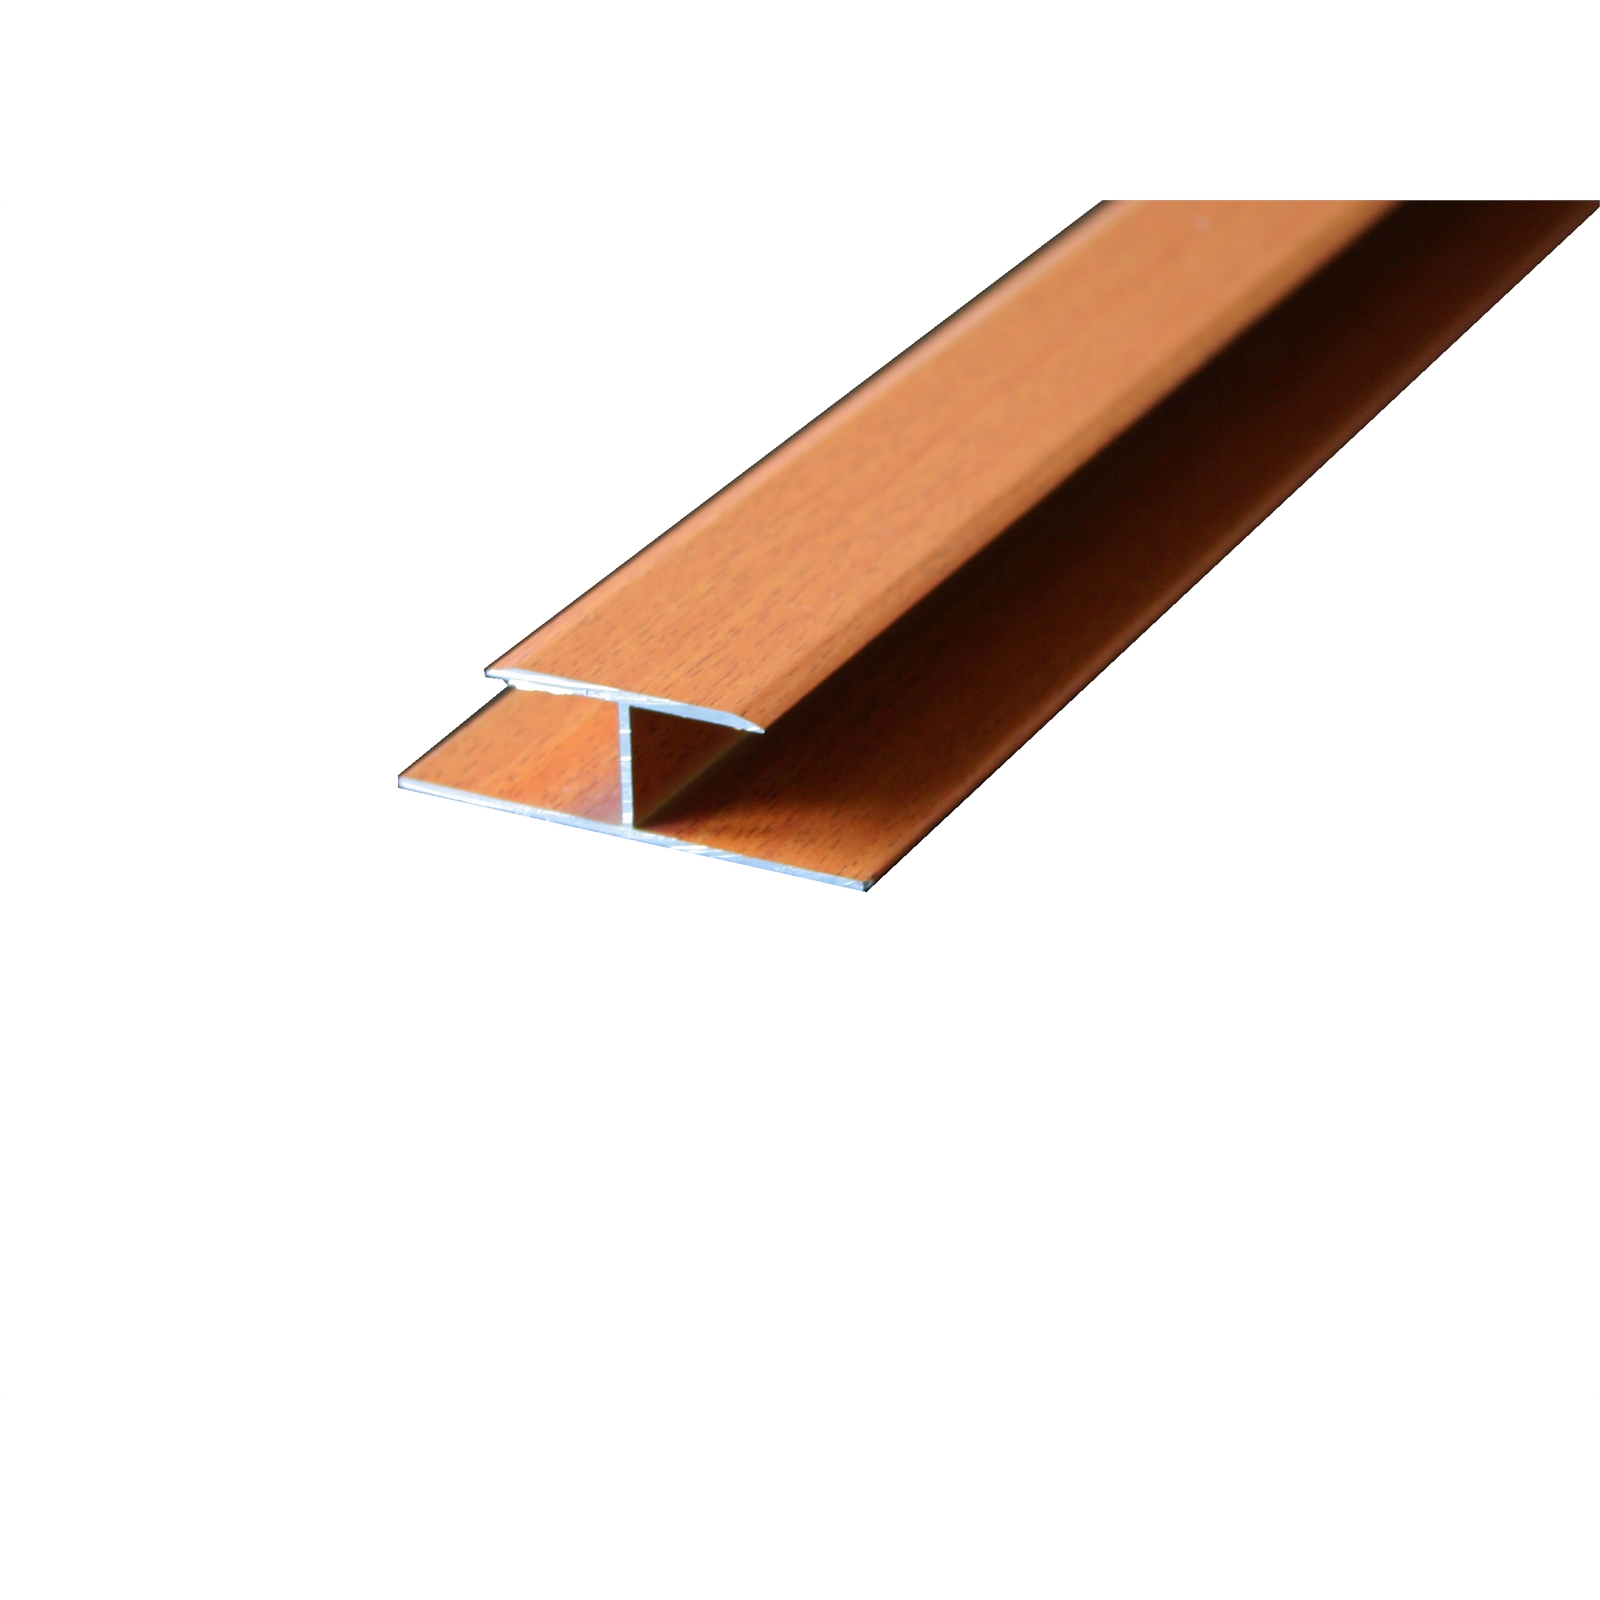 Roberts 1.65m x 15mm Mid-Light Expansion Joint Timbertone Floating Floor Trim